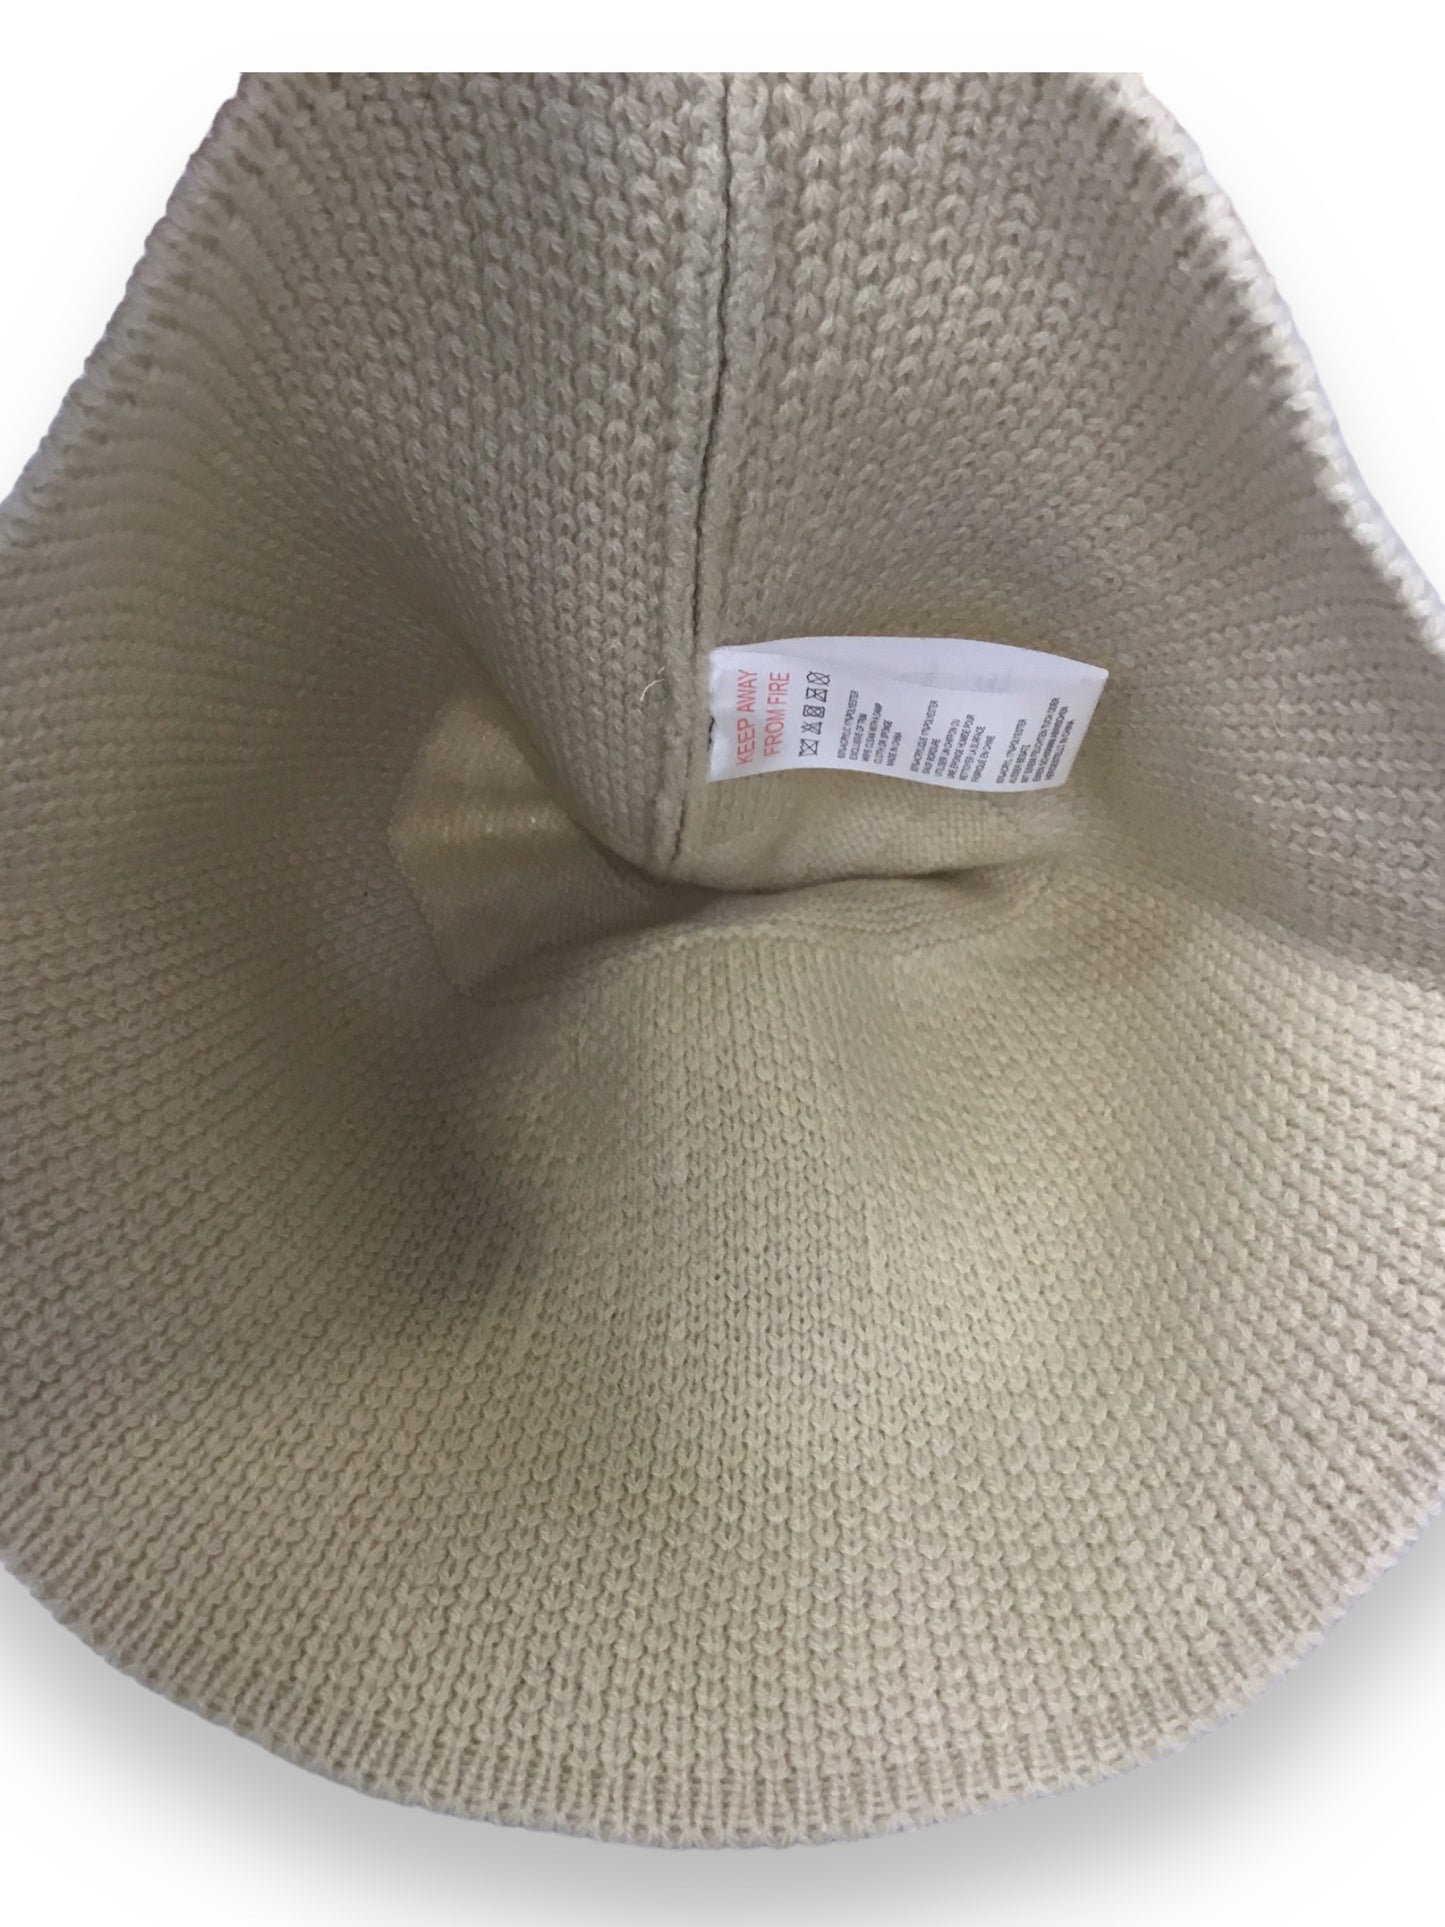 Hat Bucket By Urban Outfitters